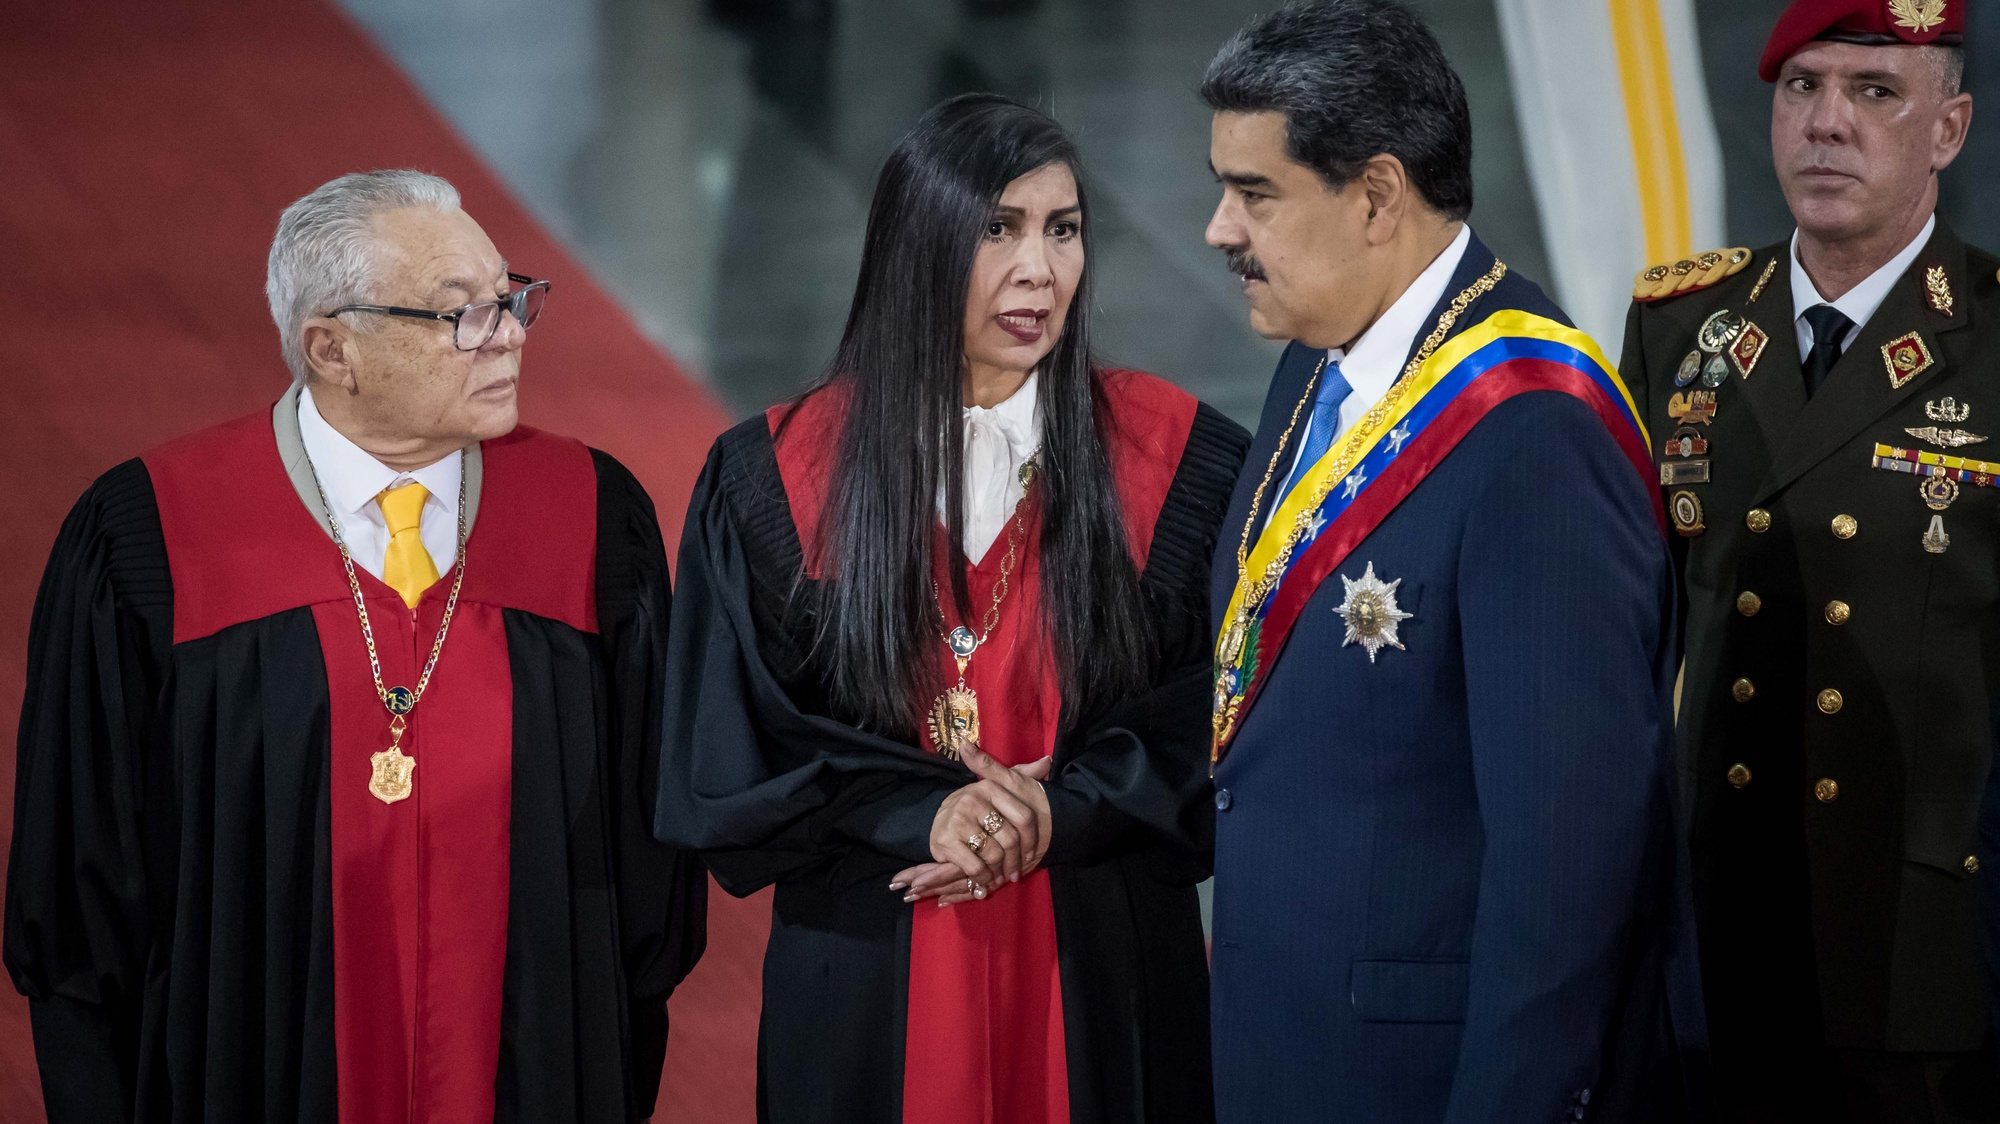 epa10441798 The President of Venezuela, Nicolas Maduro (2-R), and the president of the Supreme Court of Justice, Gladys Gutierrez (2-L), take part in the presentation of the annual report on the activities of judicial bodies, in Caracas, Venezuela, 31 January 2023. The Venezuelan Judiciary increased by 74% the number of sentences issued by specialized and non-specialized courts throughout the country during the past year compared to 2021, said this 31 January the president of the Supreme Court of Justice (TSJ), Gladys Gutierrez, in the presentation of the annual report of the activities of the judicial bodies.  EPA/MIGUEL GUTIERREZ